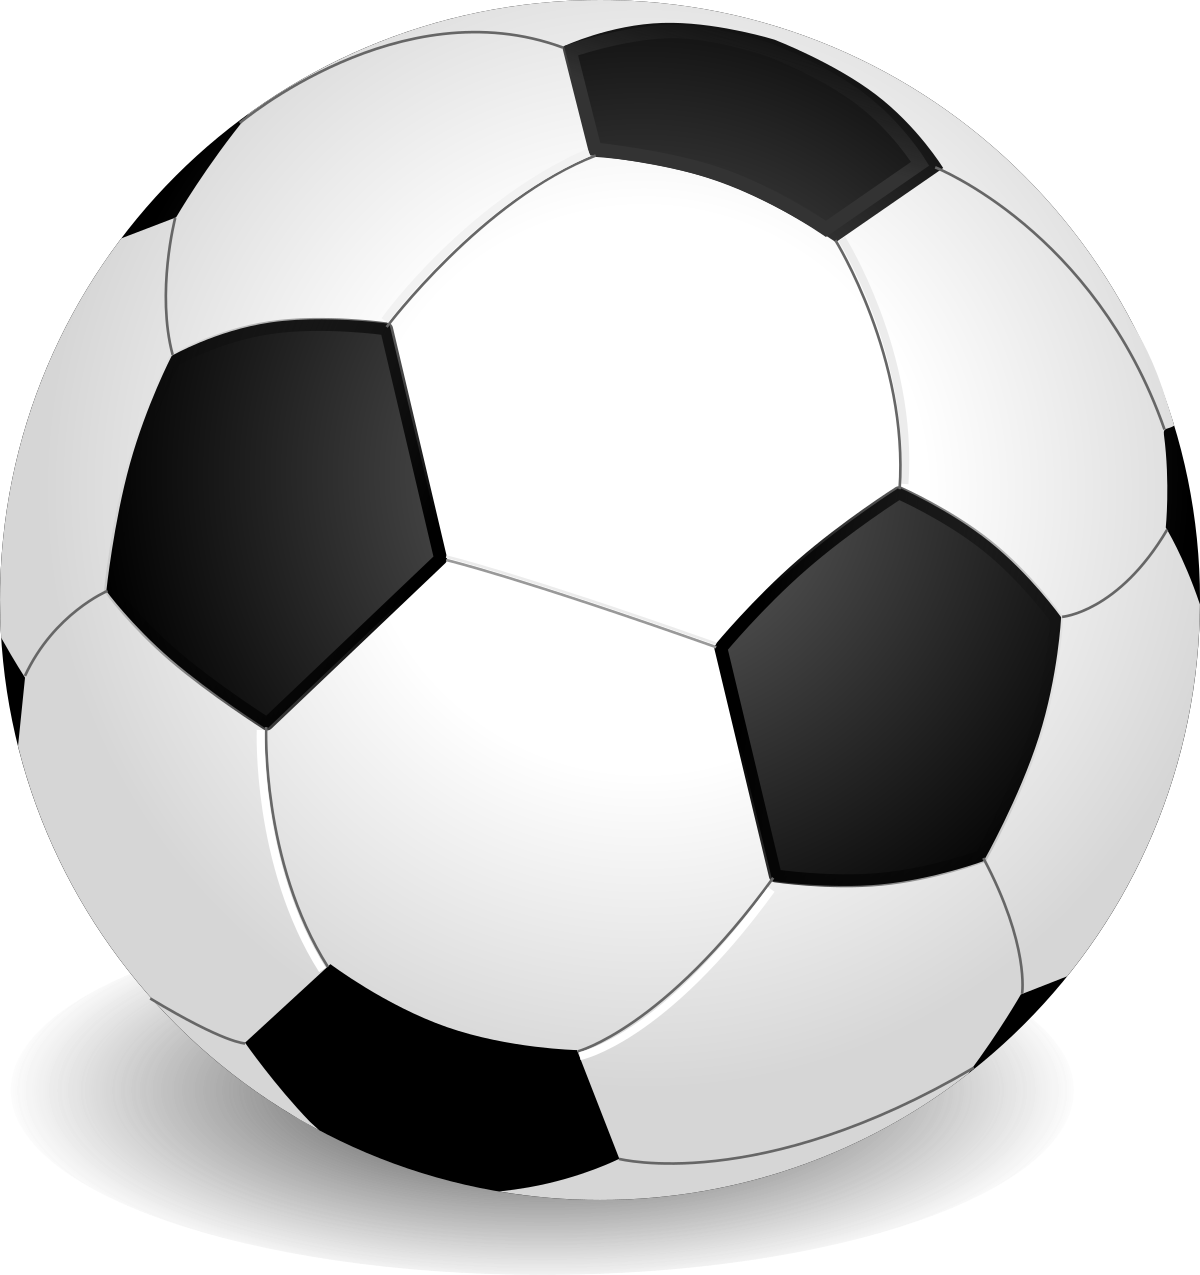 Download File:Football (soccer ball).svg - Wikimedia Commons